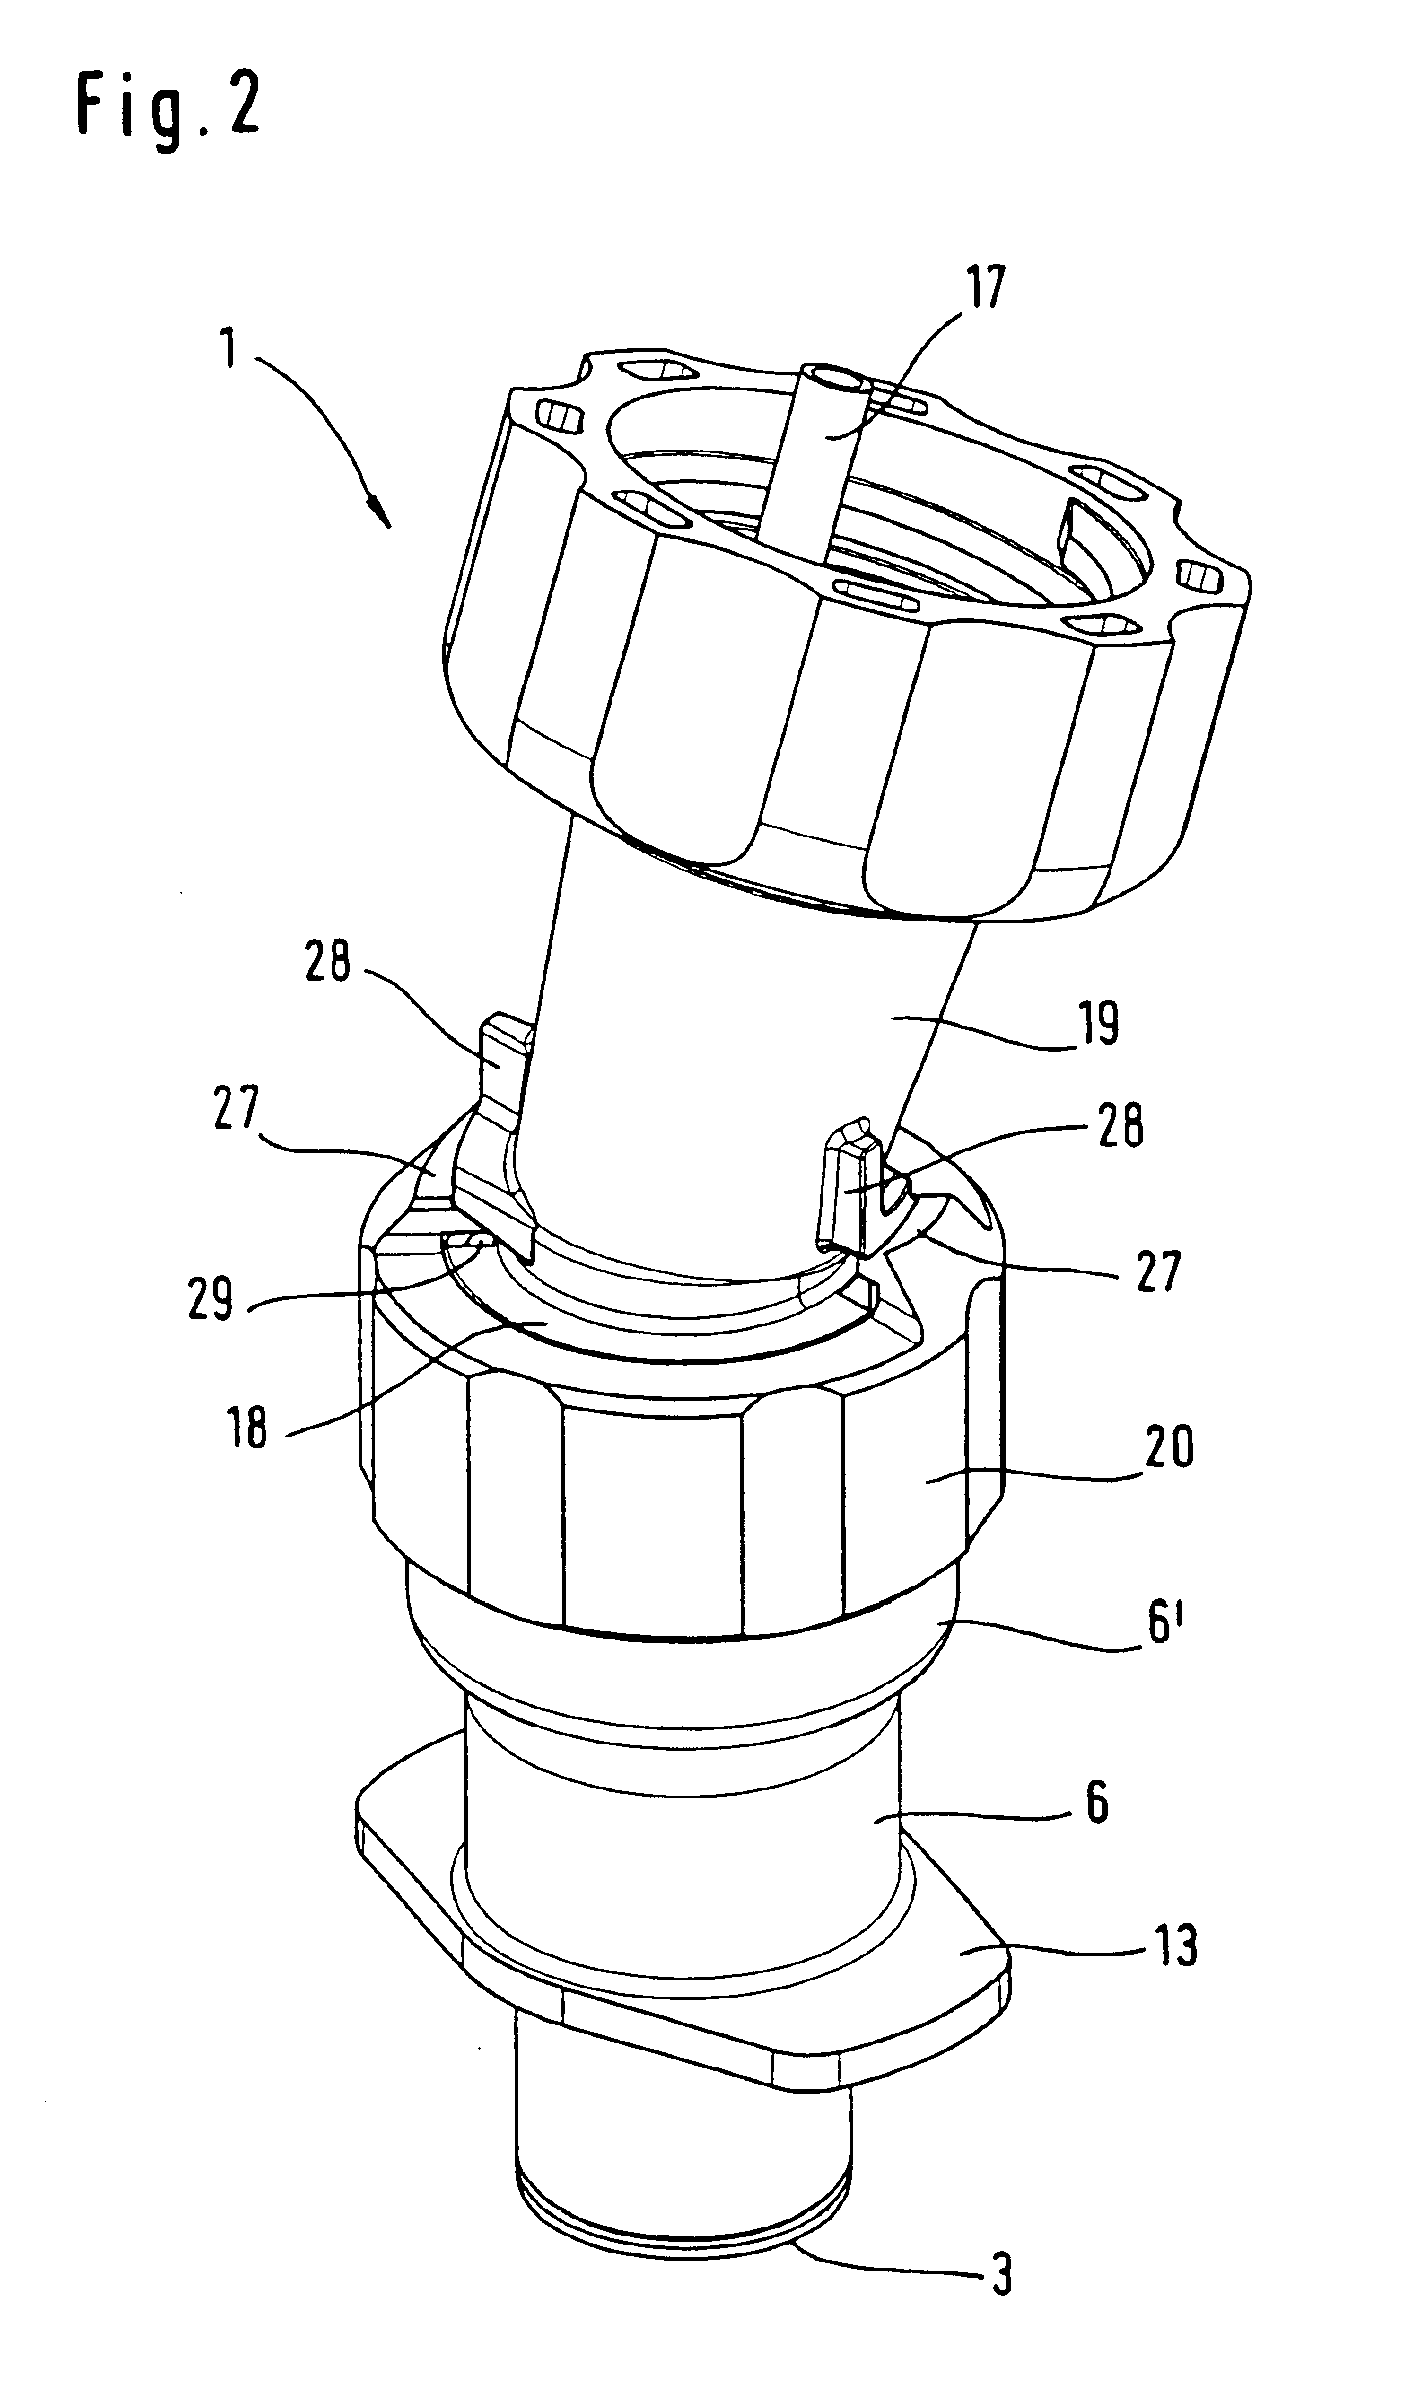 Device for decanting a liquid